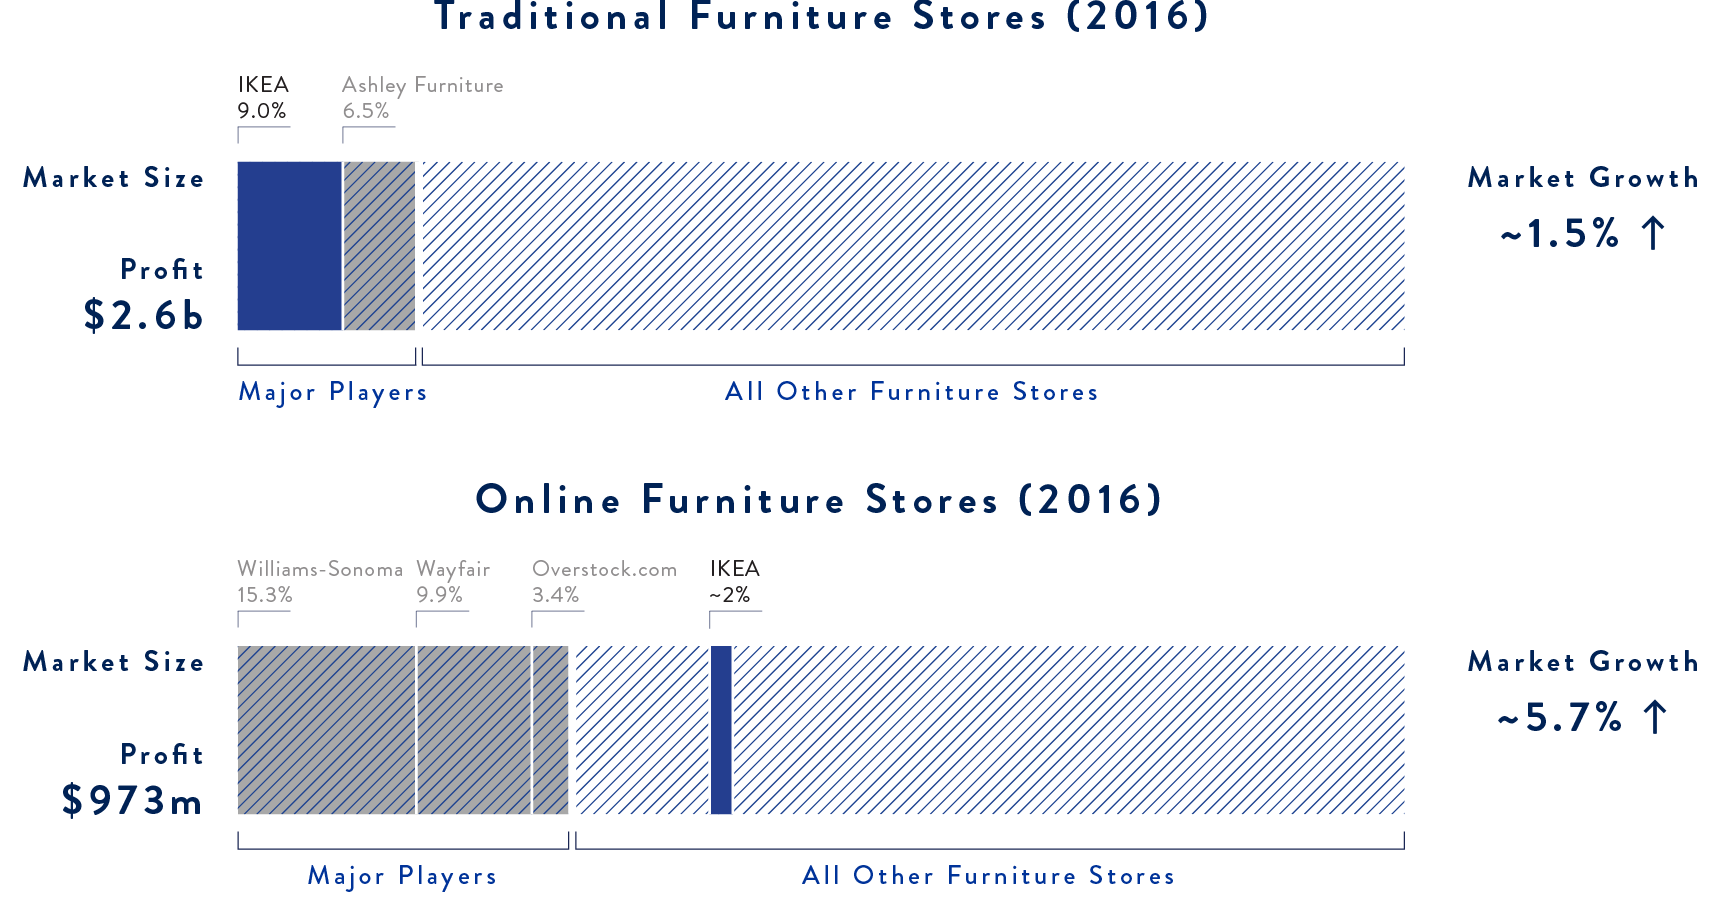 Market command and growth of traditional and online furniture stores in 2016